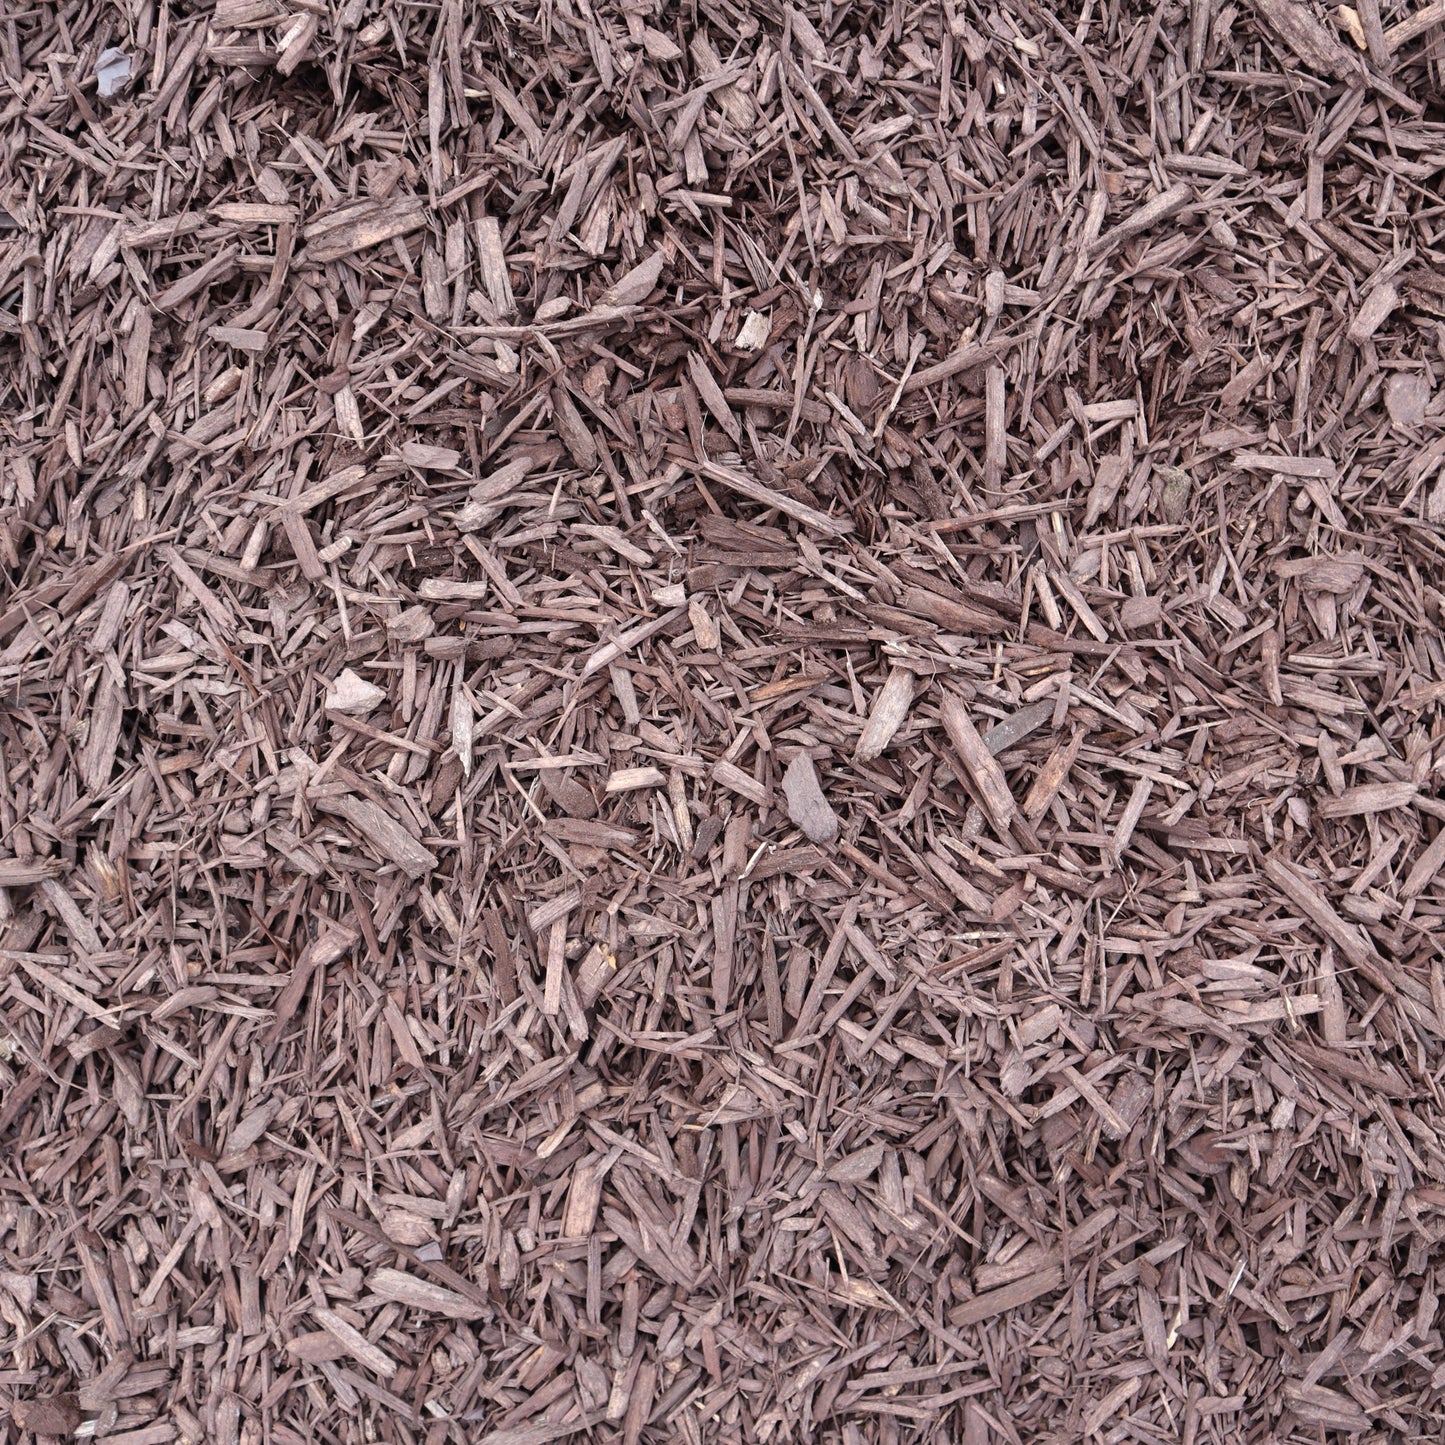 Recycled Brown Landscape Mulch Beauty bark from Missoula Dirt Delivery